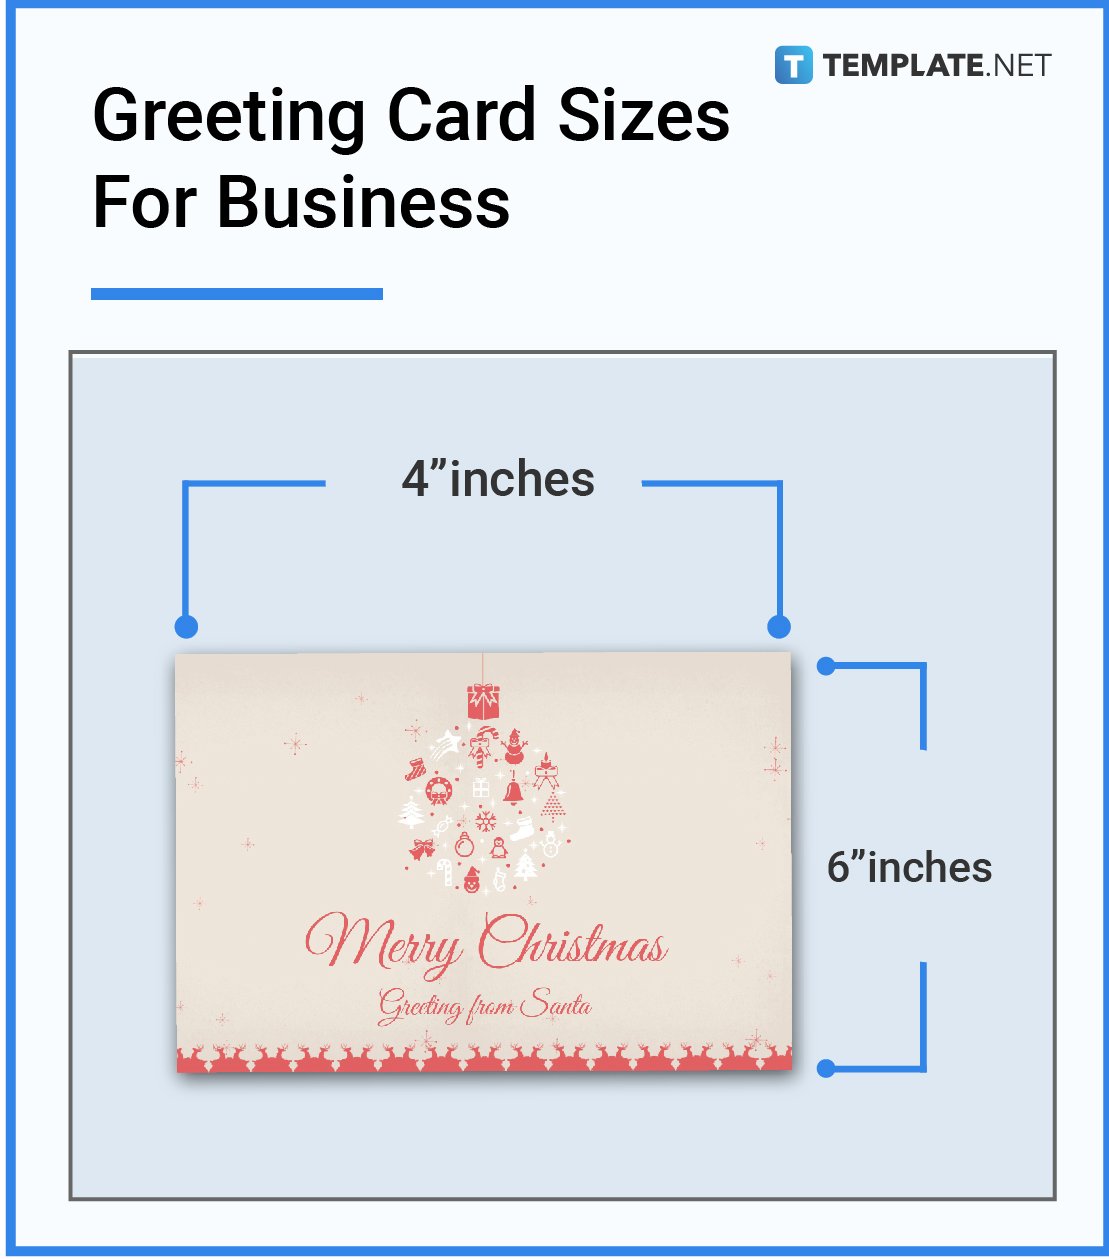 greeting card sizes for business